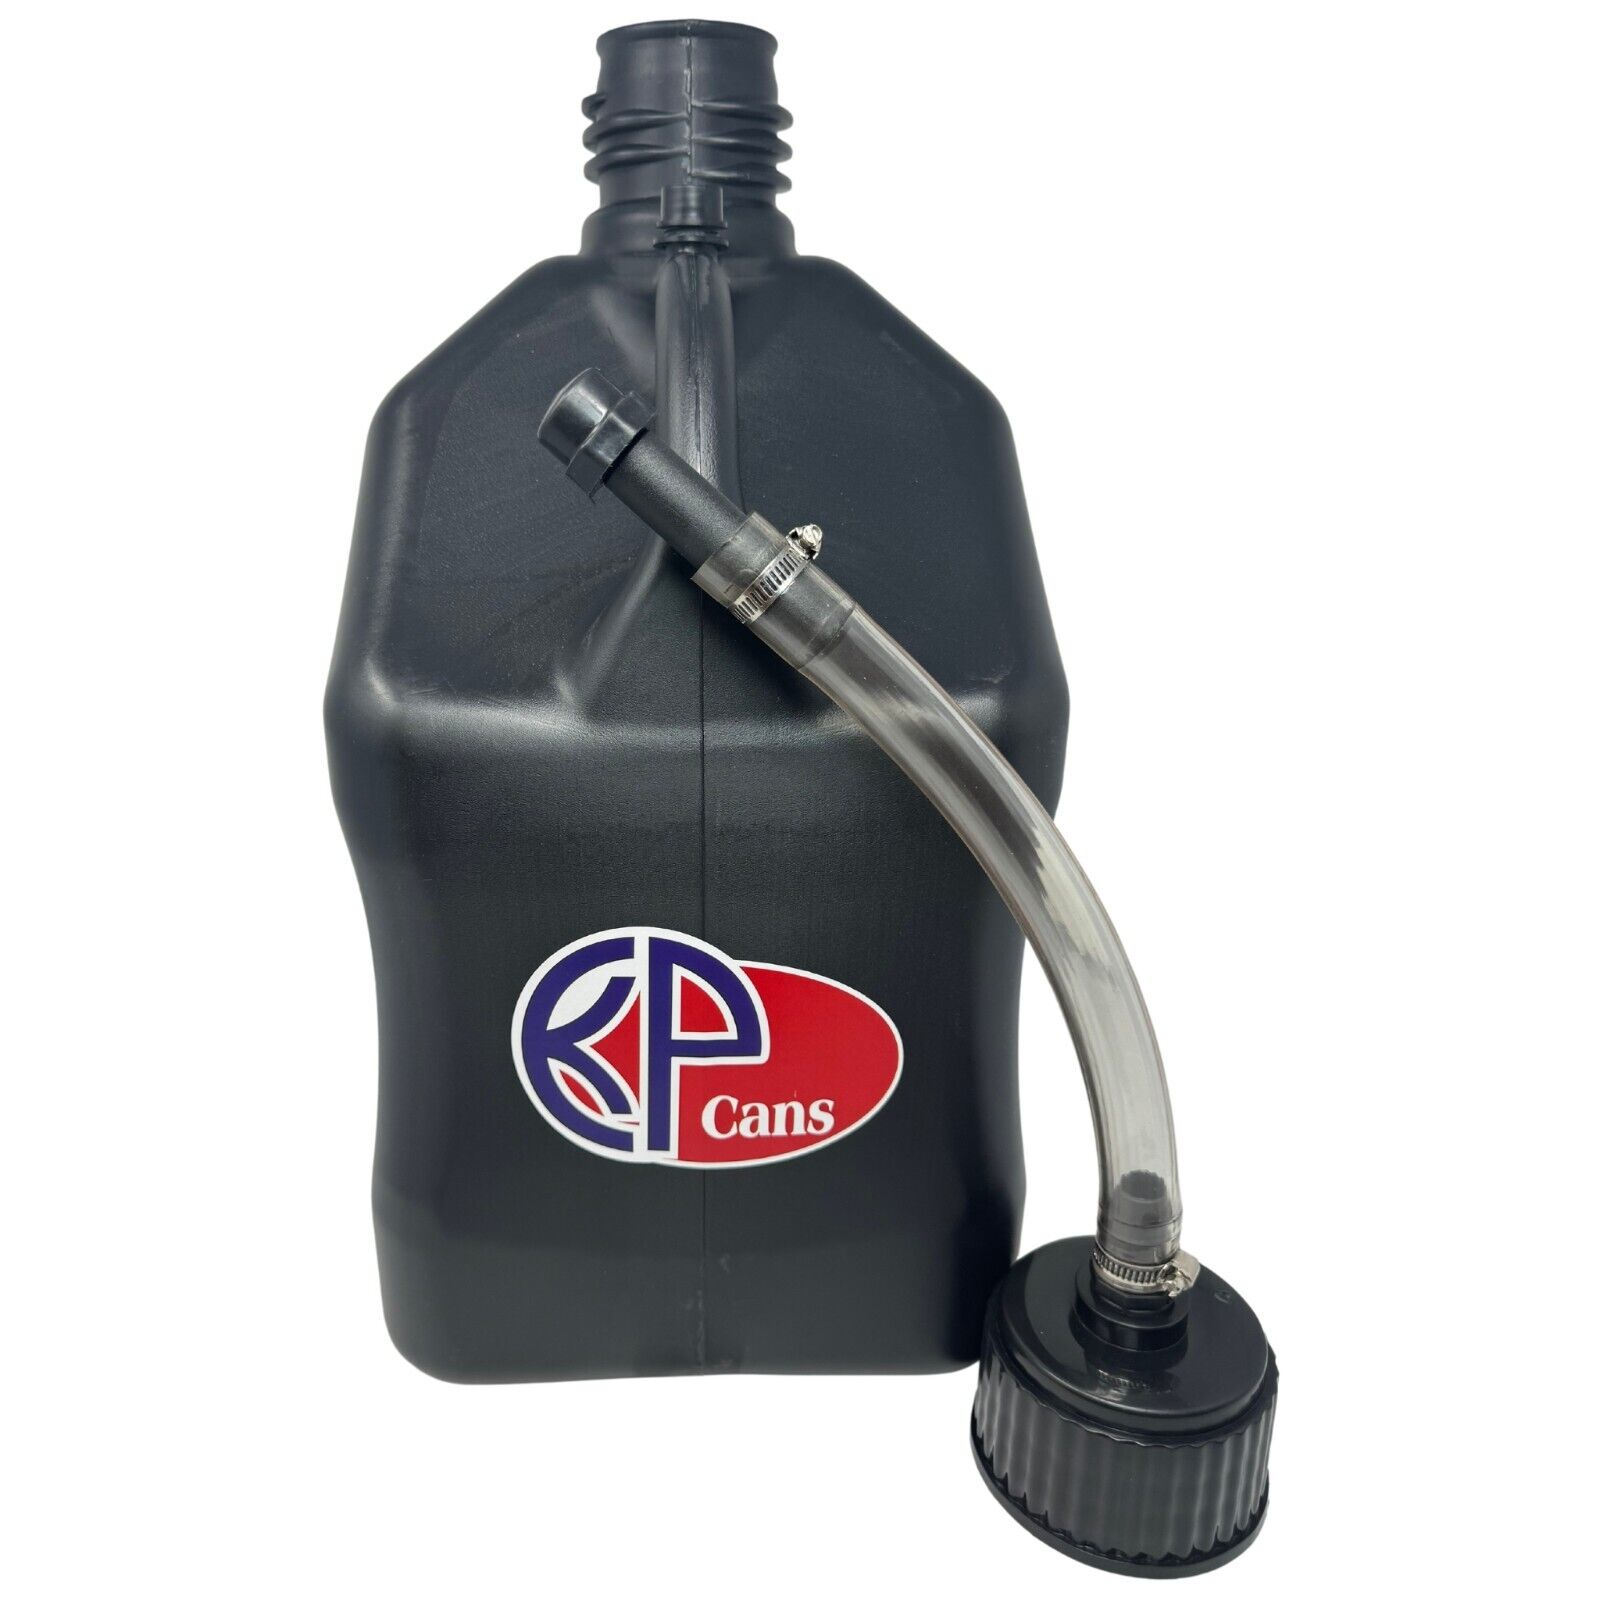 KP Cans 5.5 Gallon / 20L Utility Jug Racing Can (Specify Color) Gas Can & Hose